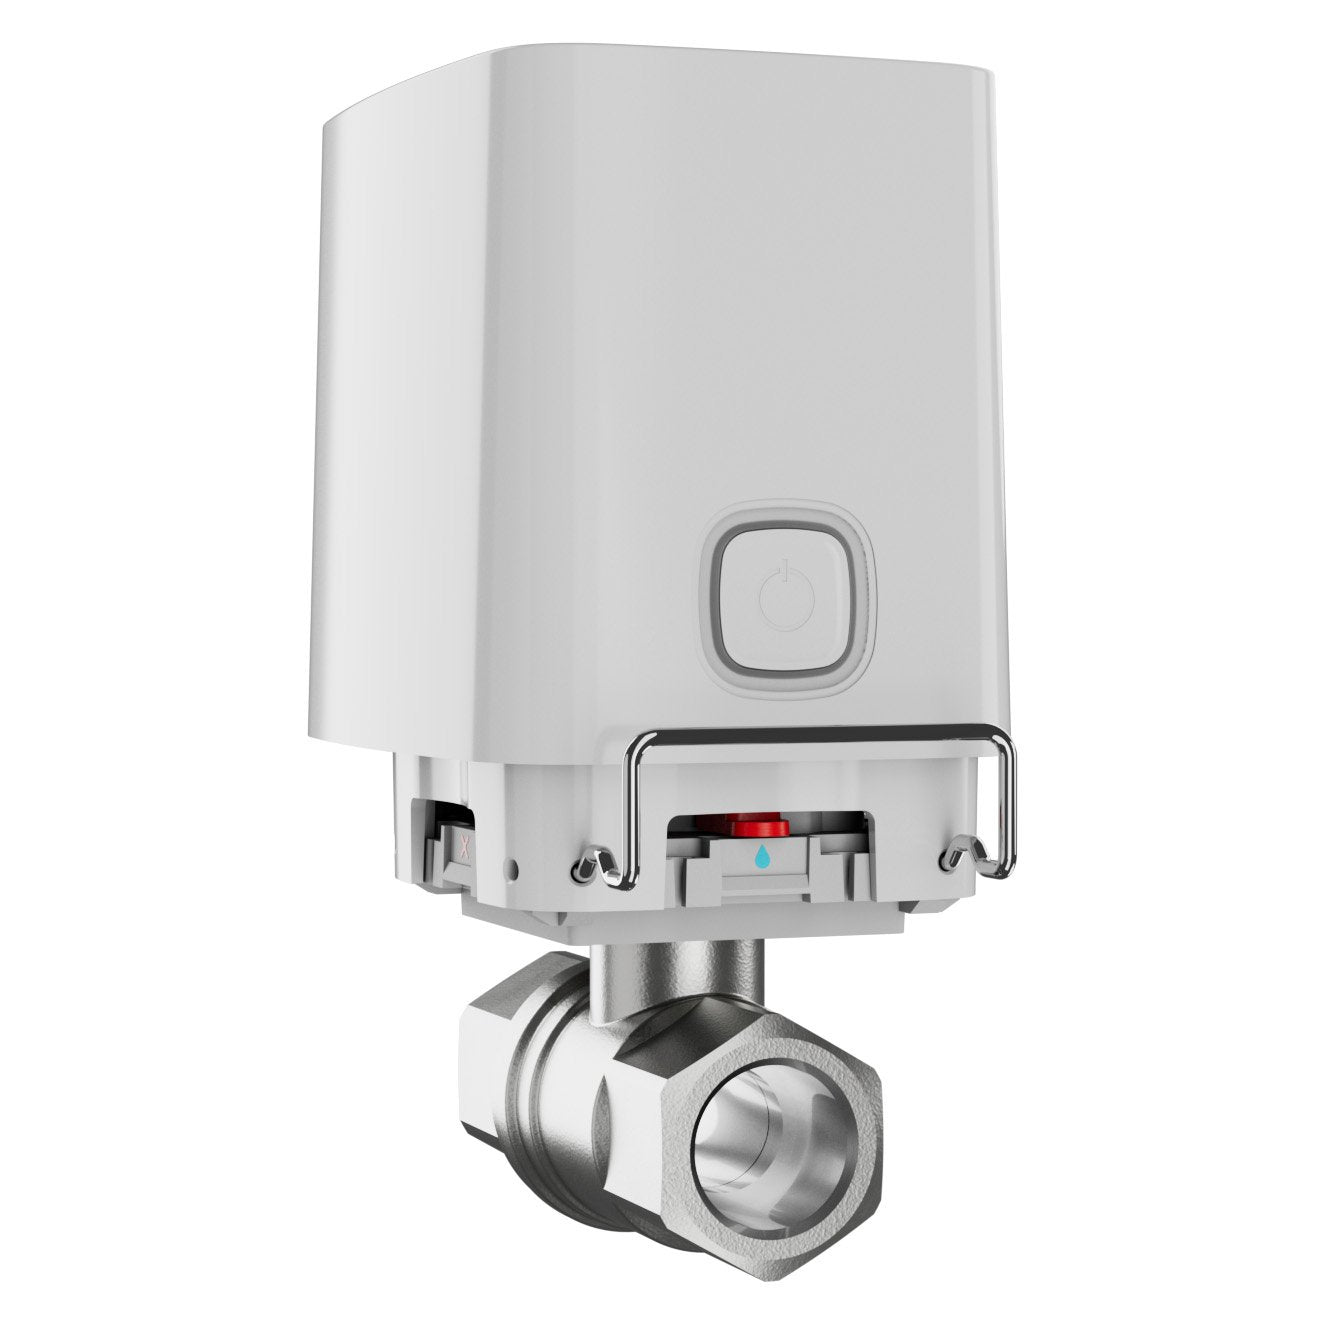 **NEW** Ajax WaterStop - 1" Remotely Controlled Water Shutoff Valve